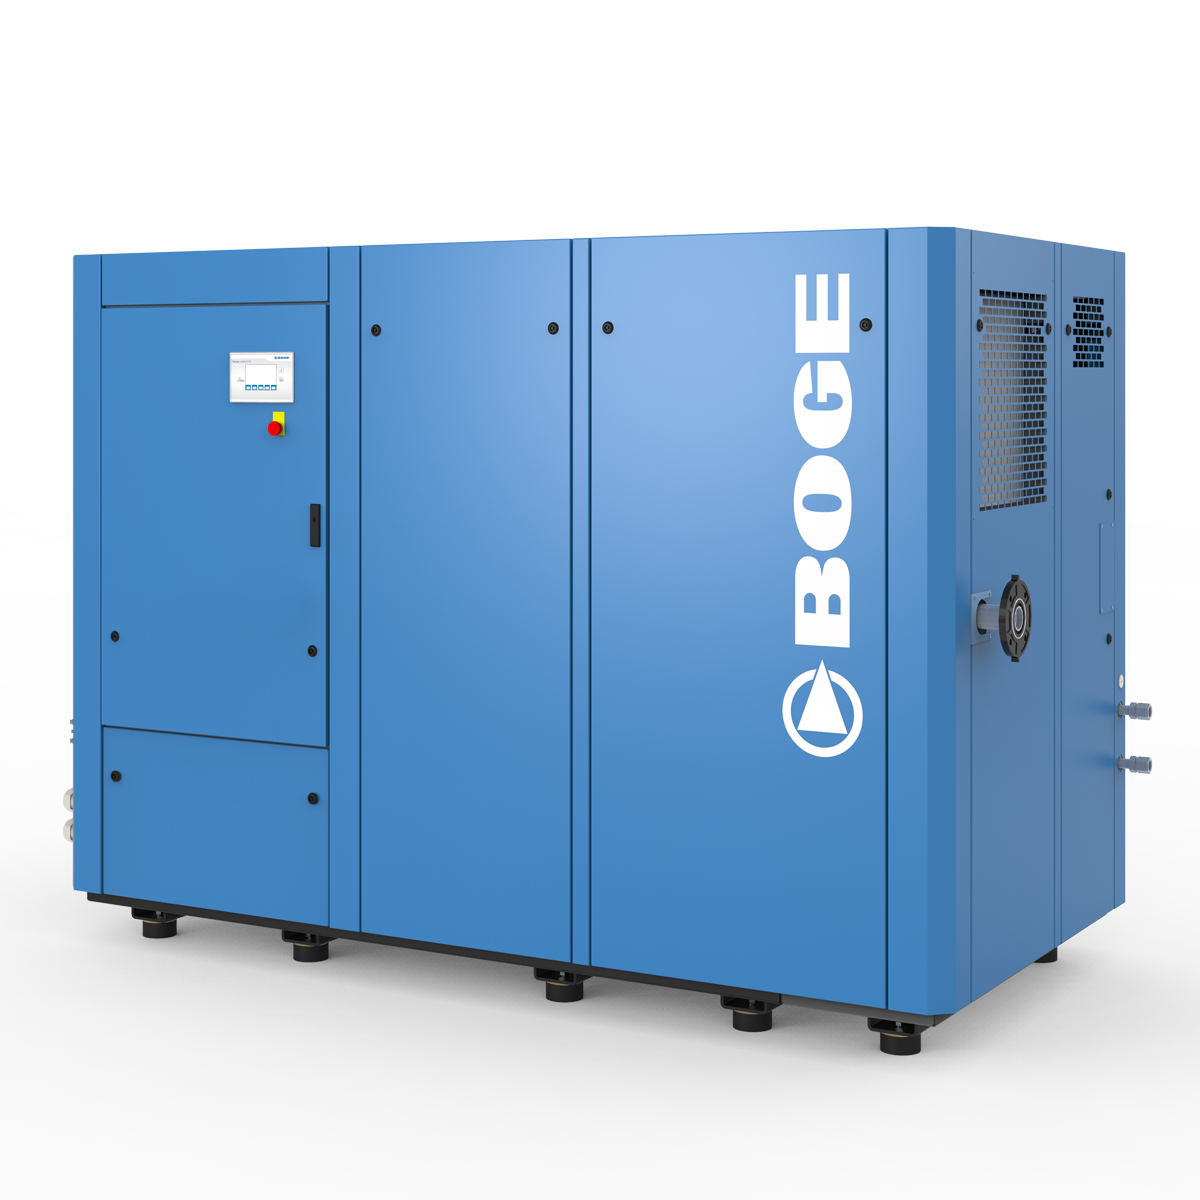 Screw Compressor S-4 ..D from 55 kW